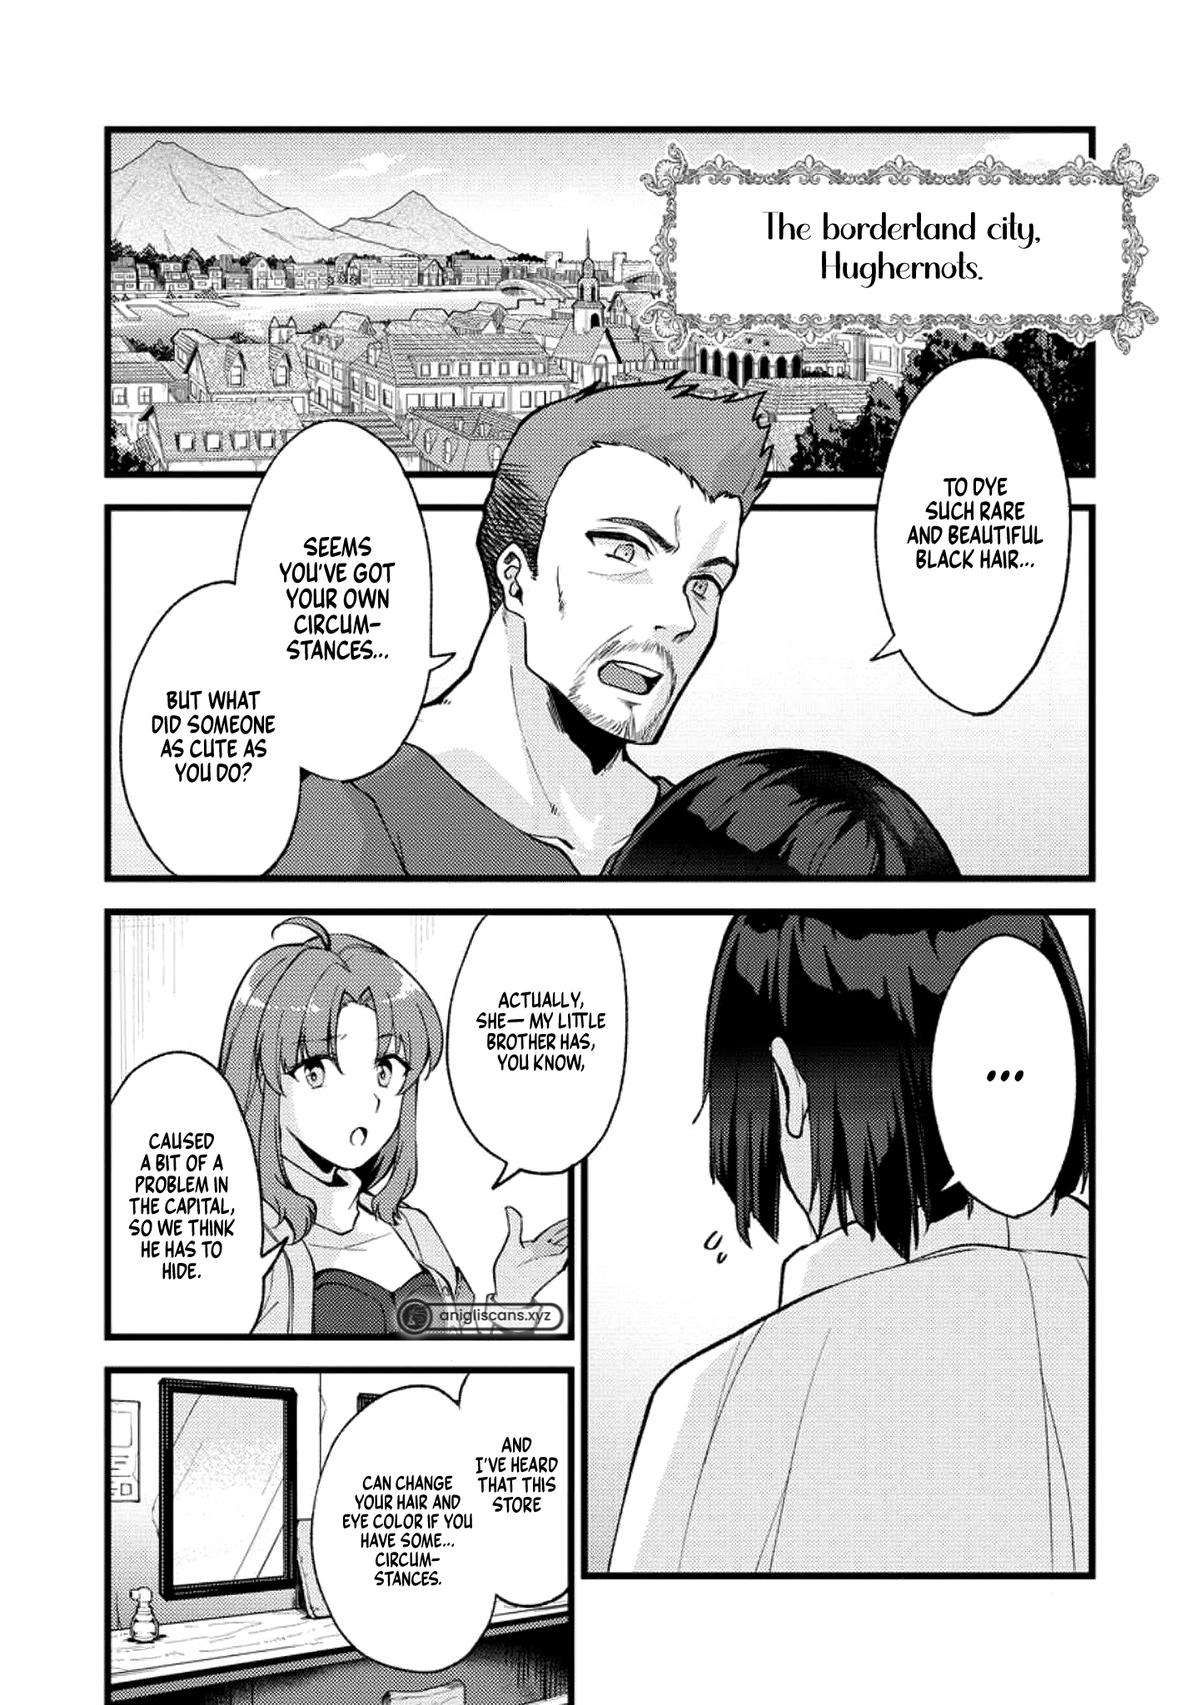 A Sword Master Childhood Friend Power Harassed Me Harshly - chapter 21 - #2